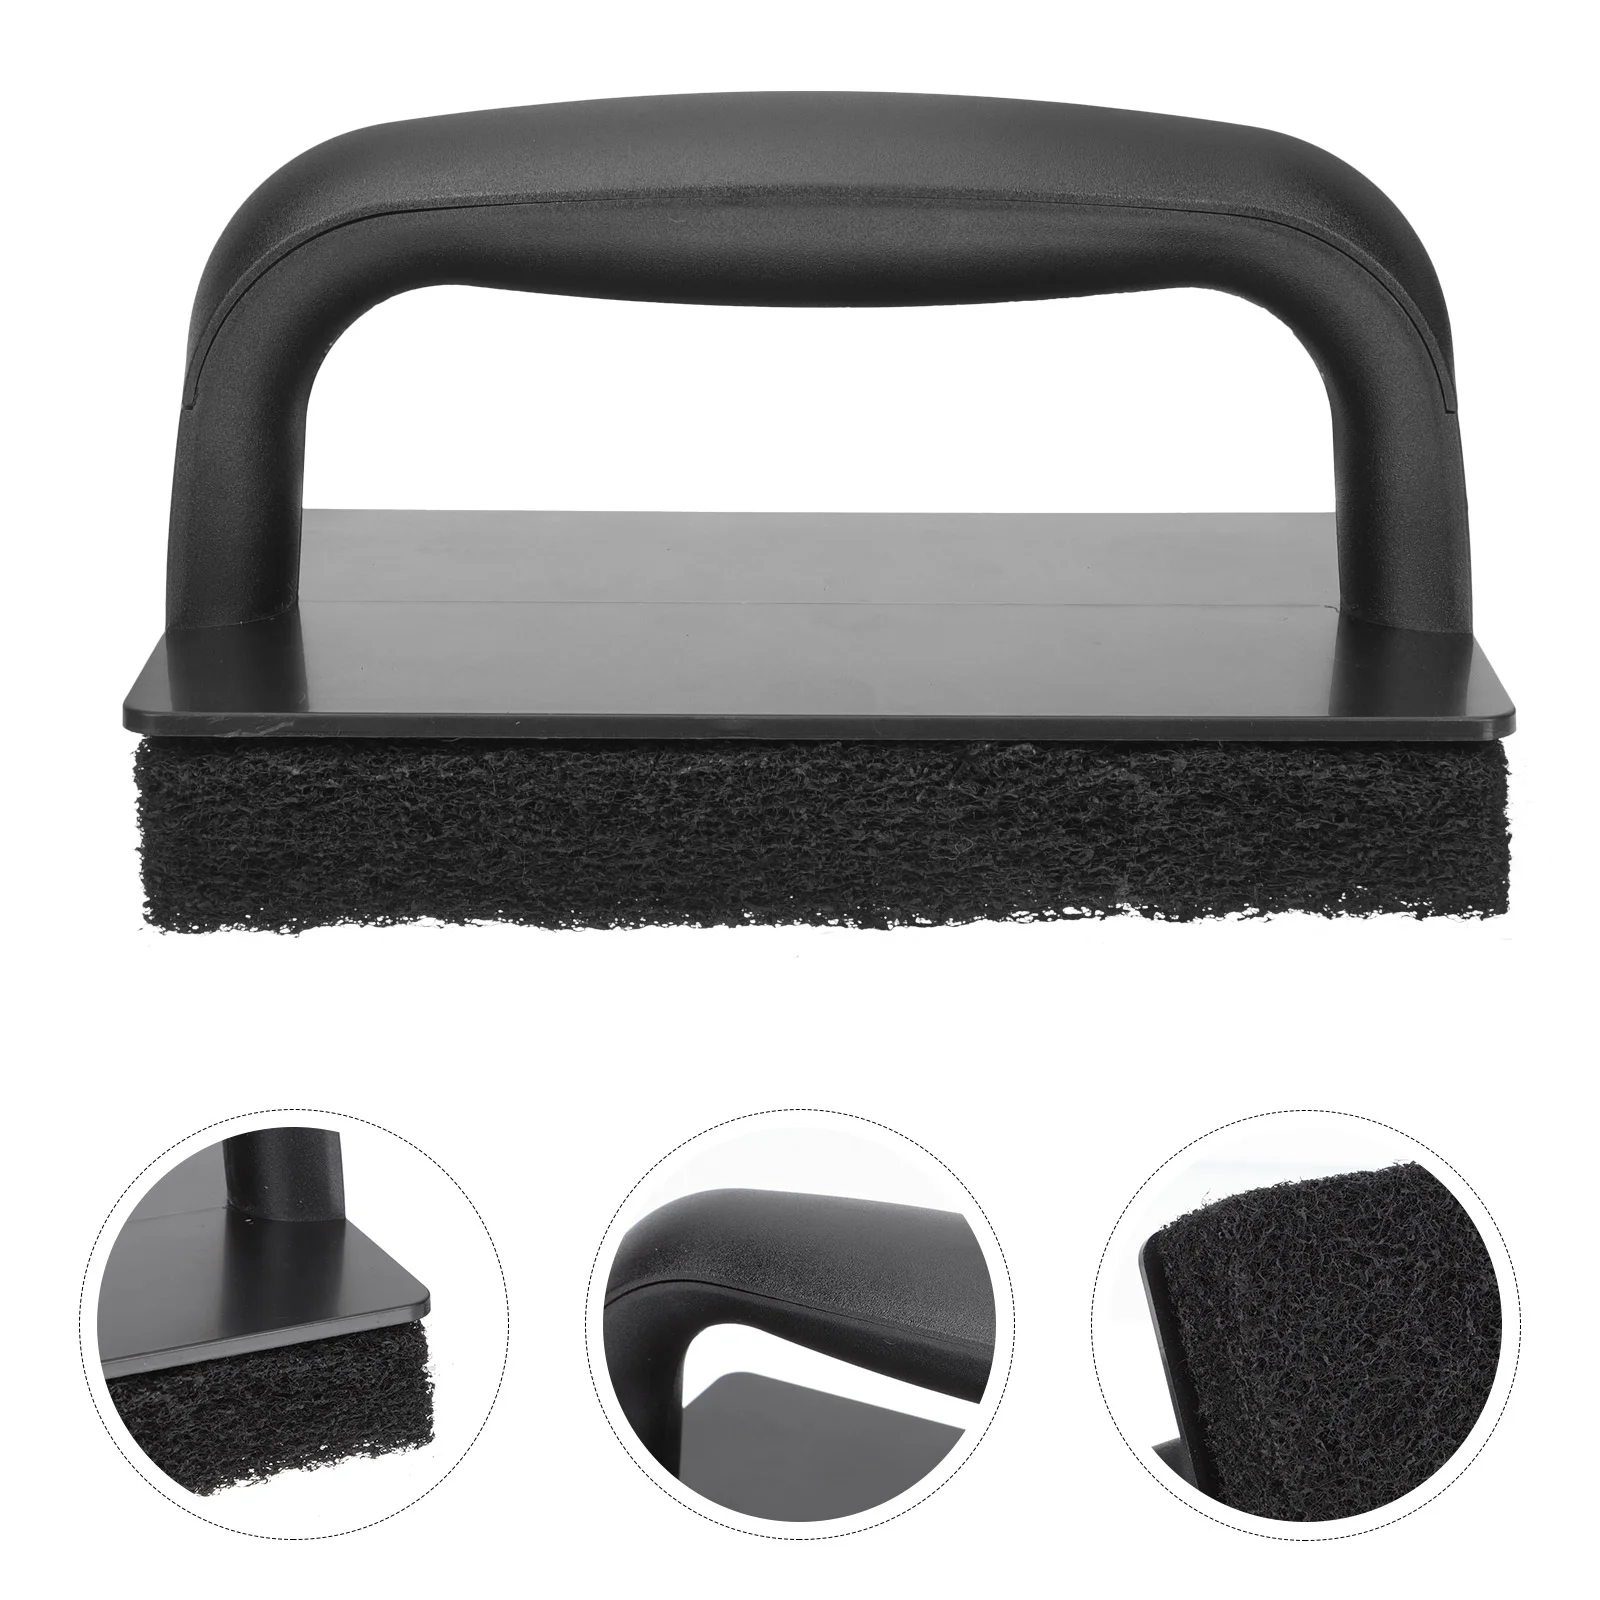 

Brush Grill Cleaning Bbq Griddle Barbecue Cleaner Sponge Pads Scrub Scraper Scrubber Rack Dish Pad Accessories Grate Brushes Kit